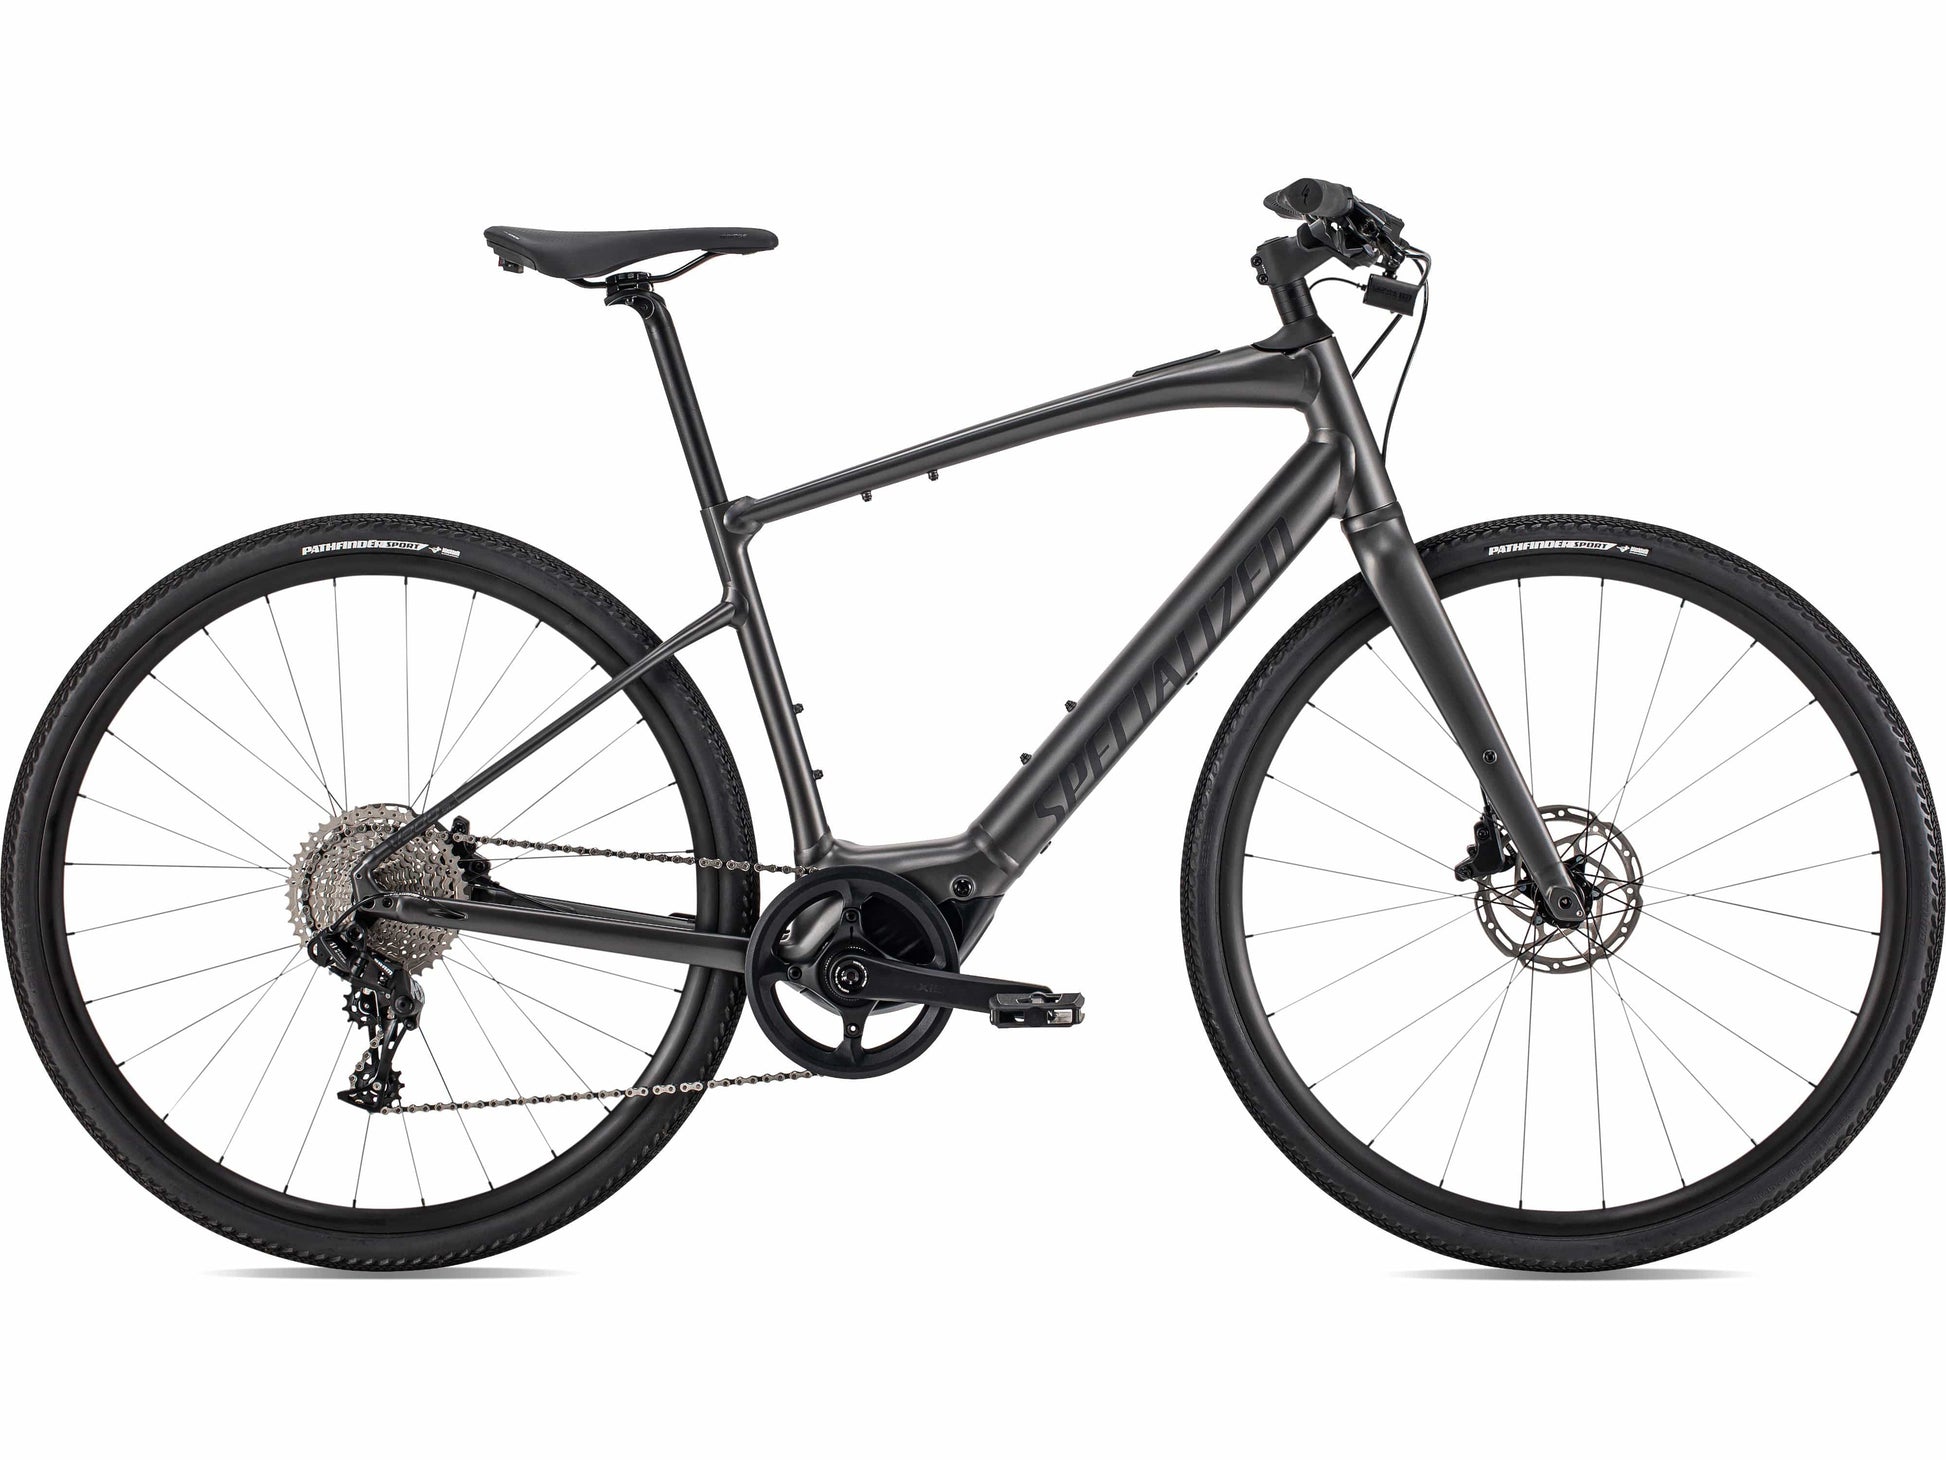 Specialized Turbo Vado SL 4.0 ebike smoke black side view on Fly Rides